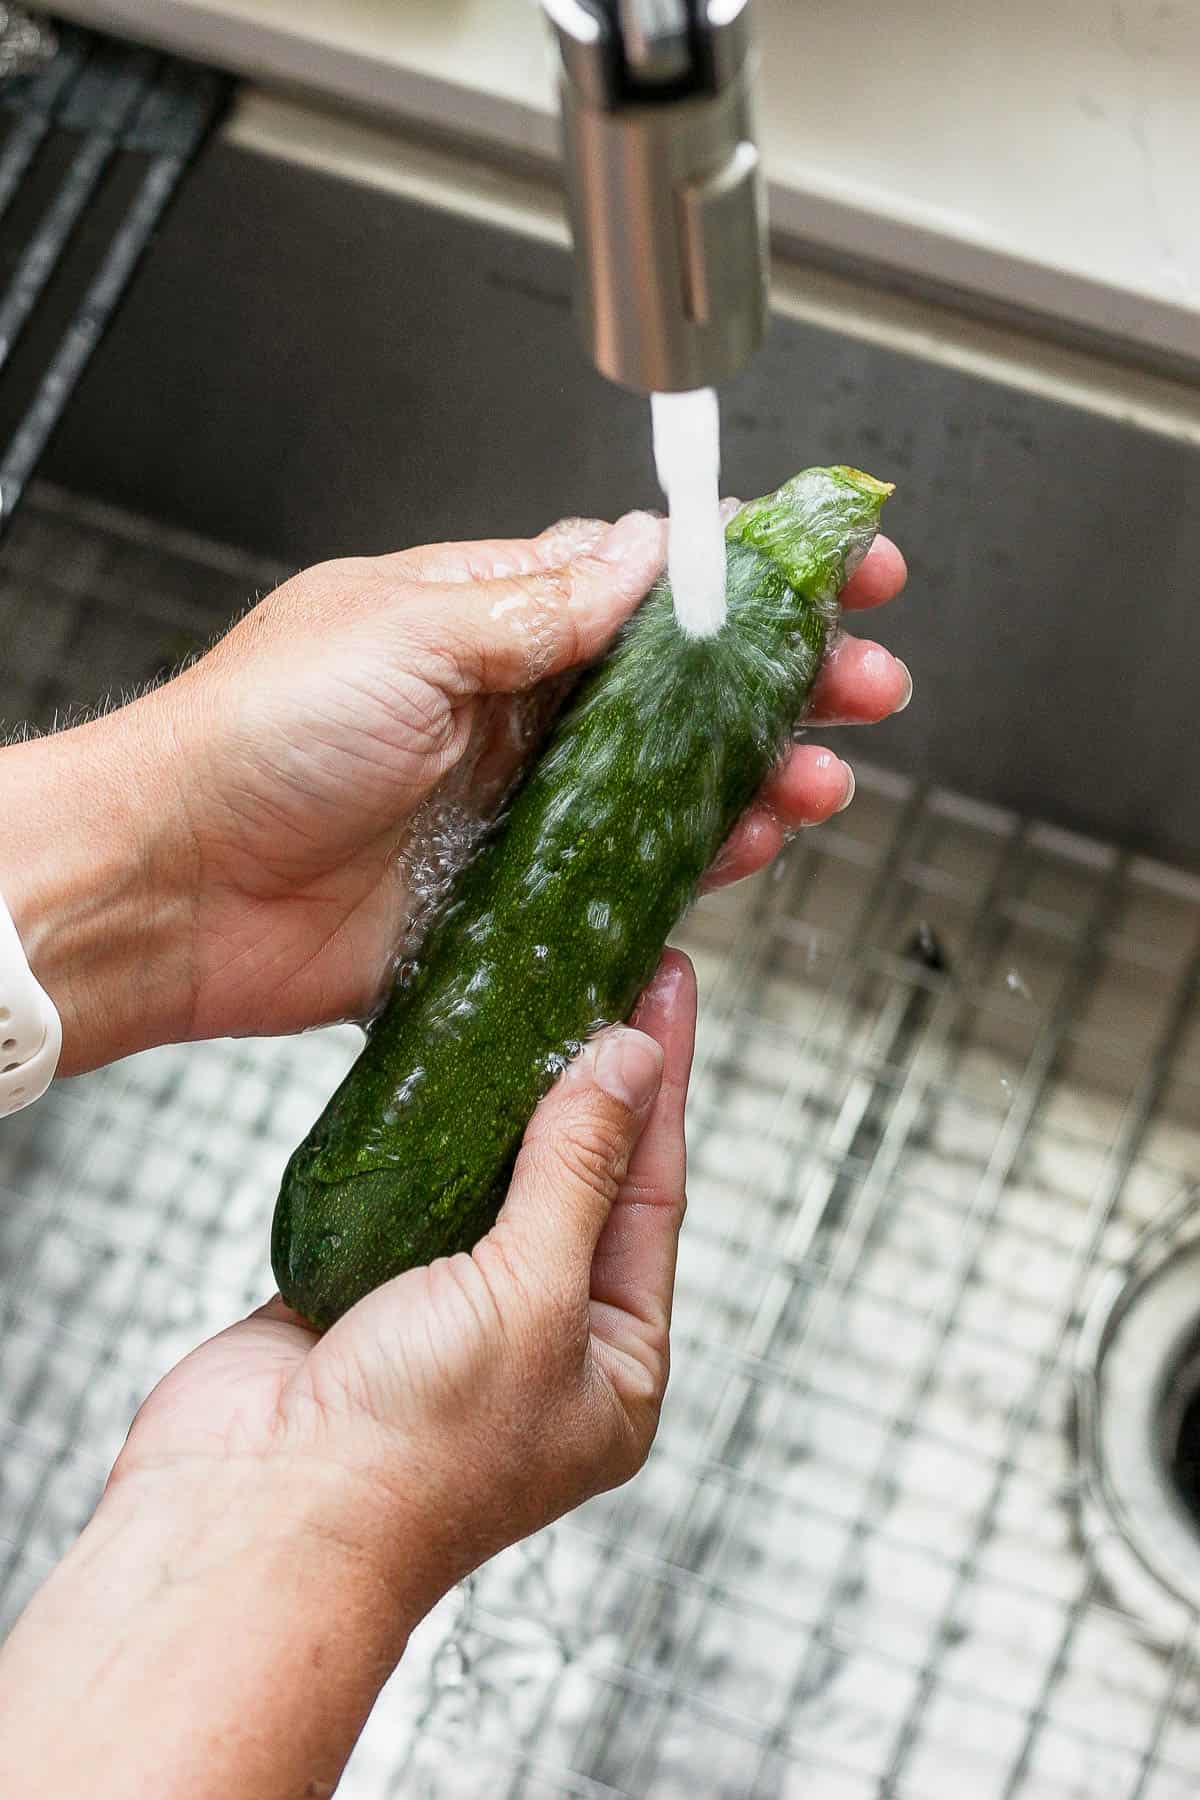 Someone washing off a zucchini in the sink. 